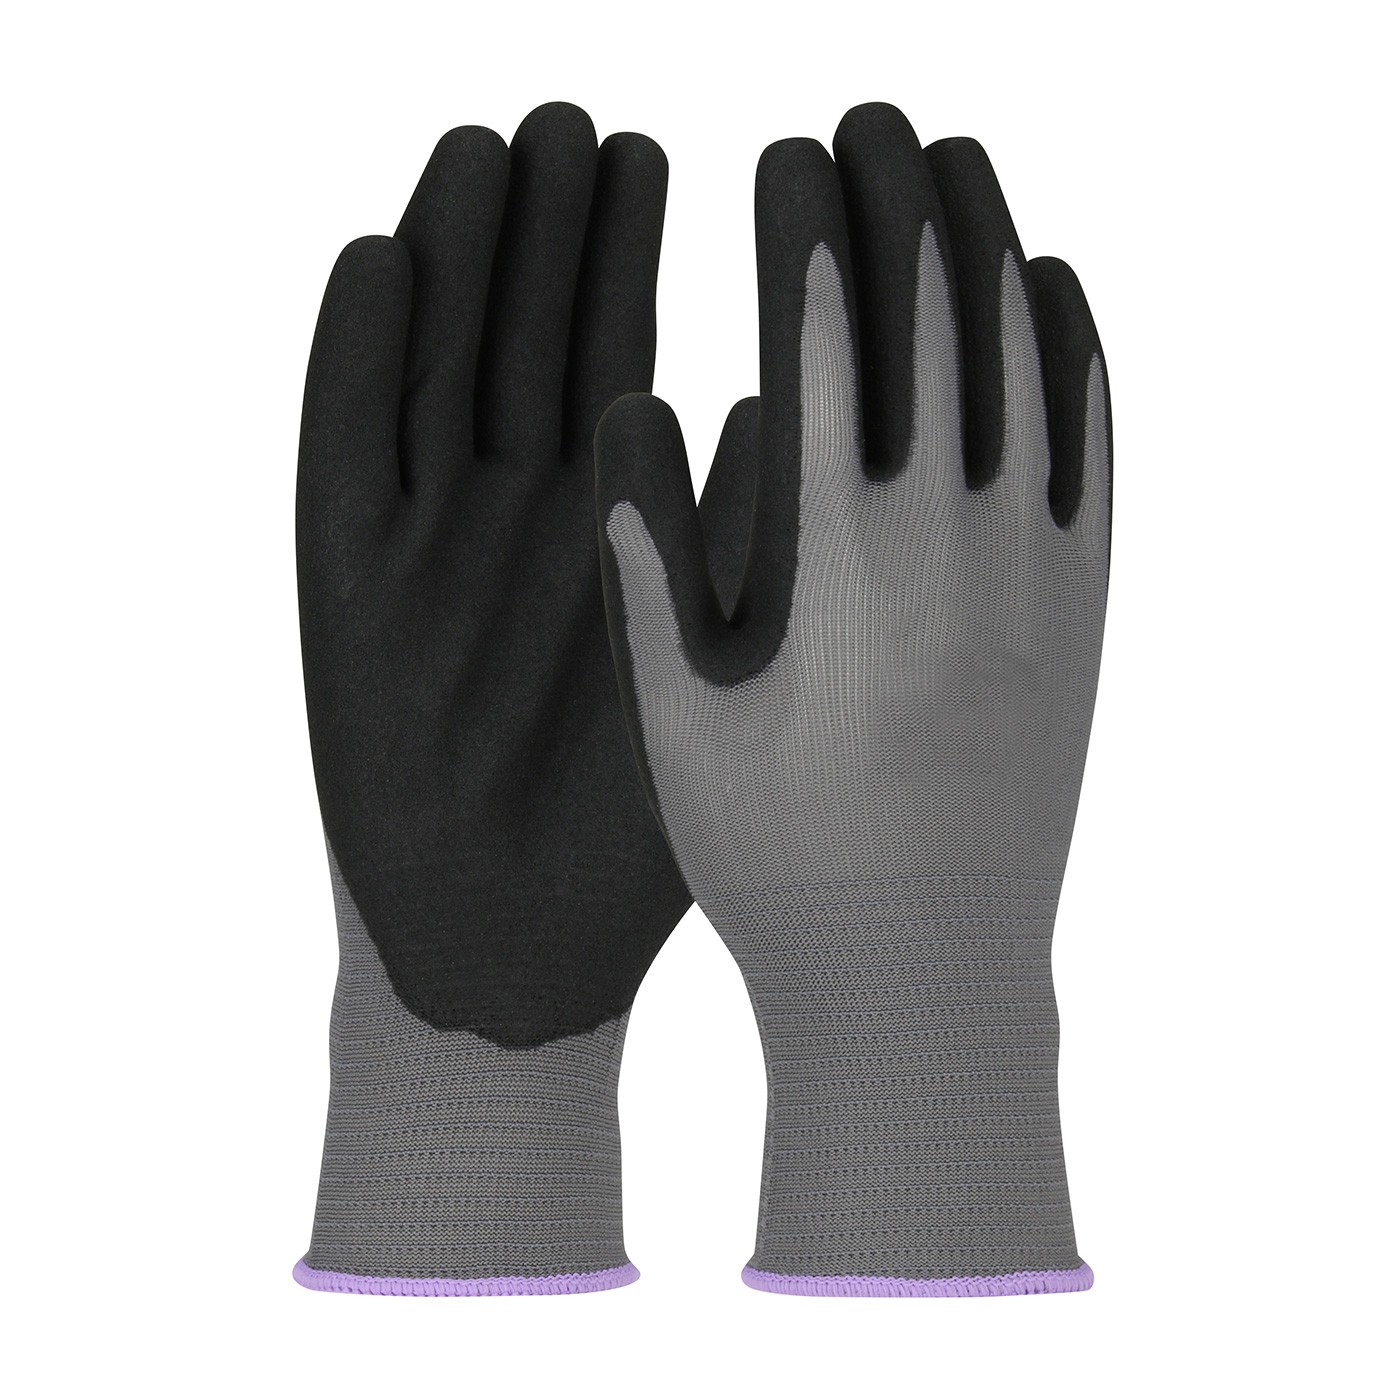 G-Tek® GP™ Seamless Knit Polyester Glove with Nitrile Coated MicroSurface Grip on Palm & Fingers - 13 Gauge (#34-300)